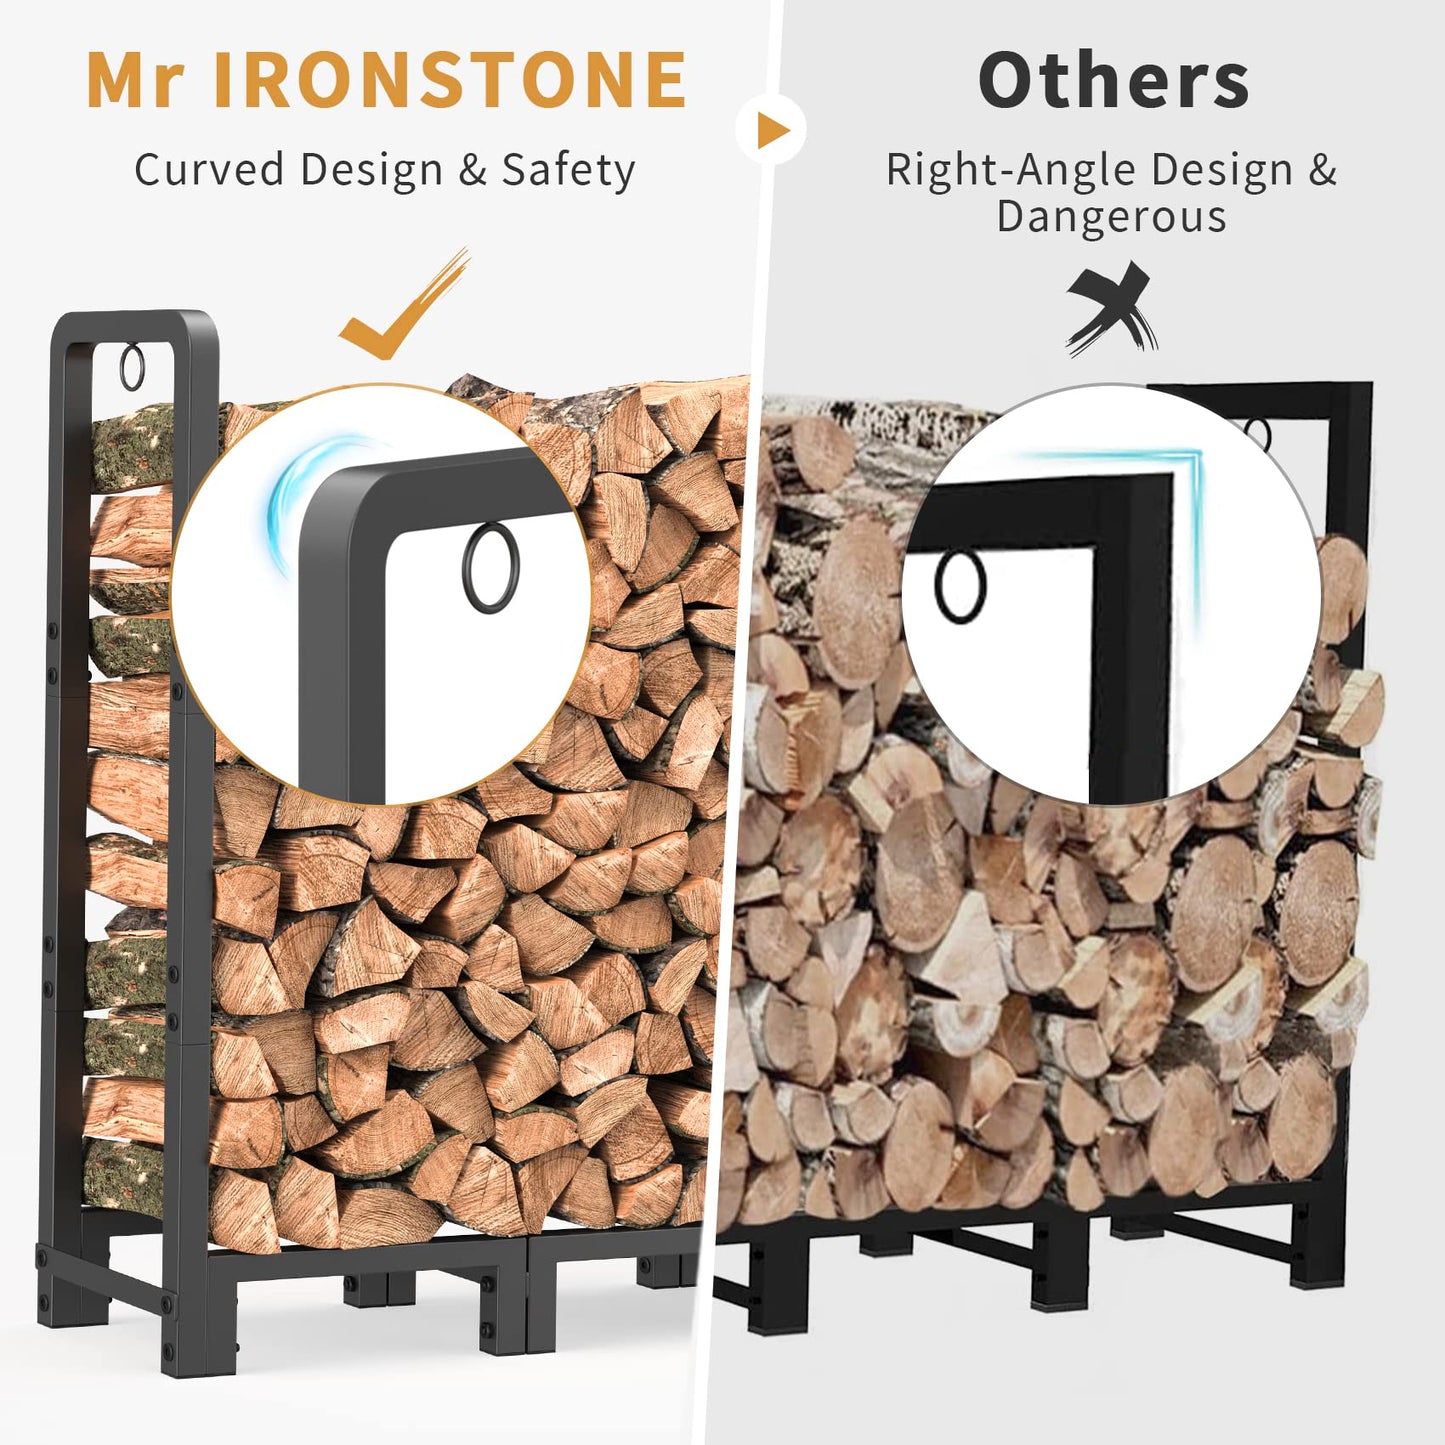 Mr IRONSTONE 4ft Firewood Rack Outdoor Indoor for Wood Storage, Upgraded Adjustable Firewood Rack, Heavy Duty Logs Stand Stacker Holder for Fireplace, Firewood Log Rack Stand Stacker for Porch Patio